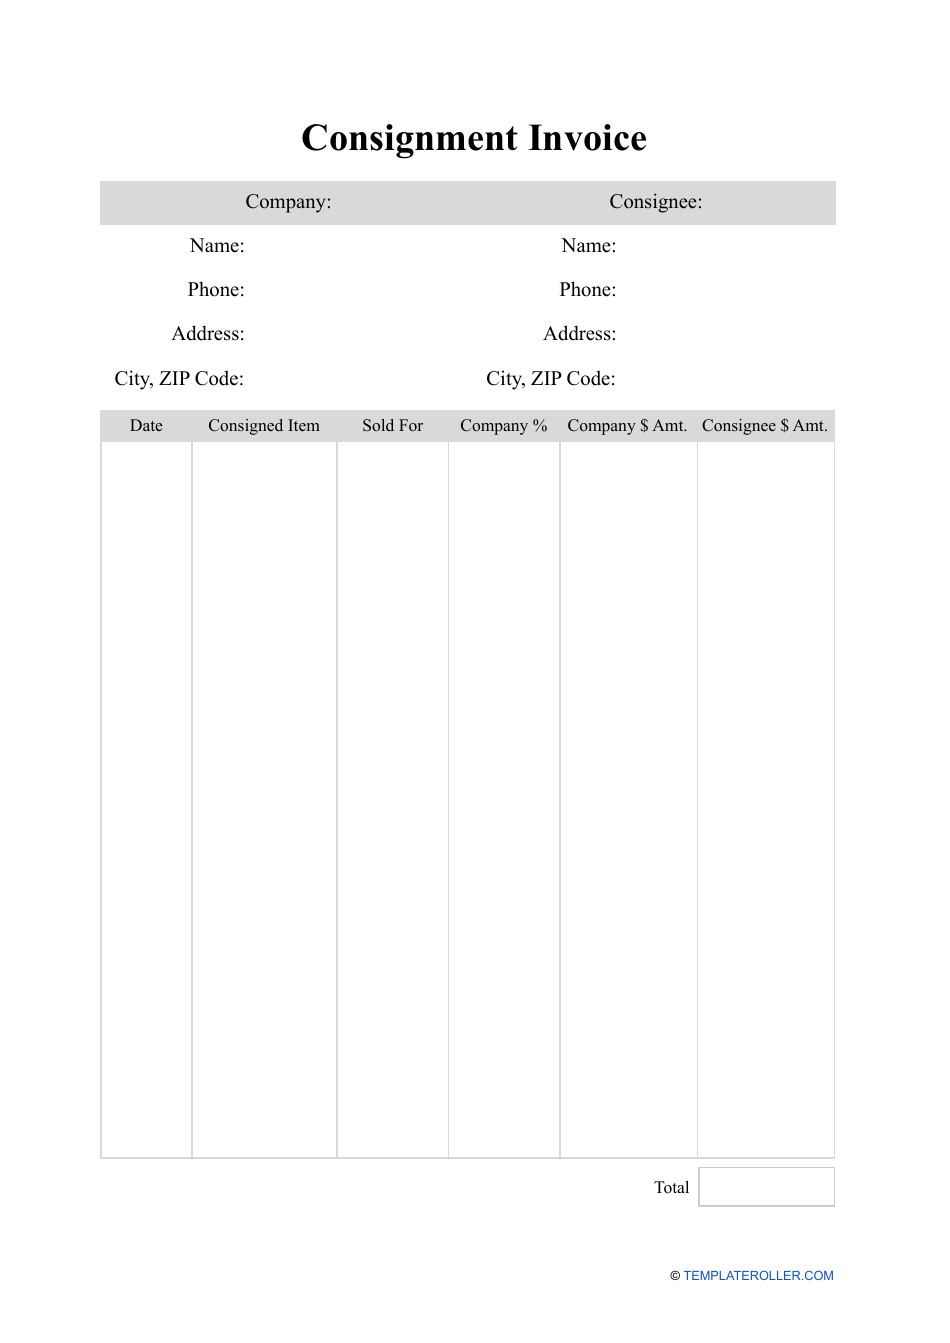 Consignment Invoice Template, Page 1